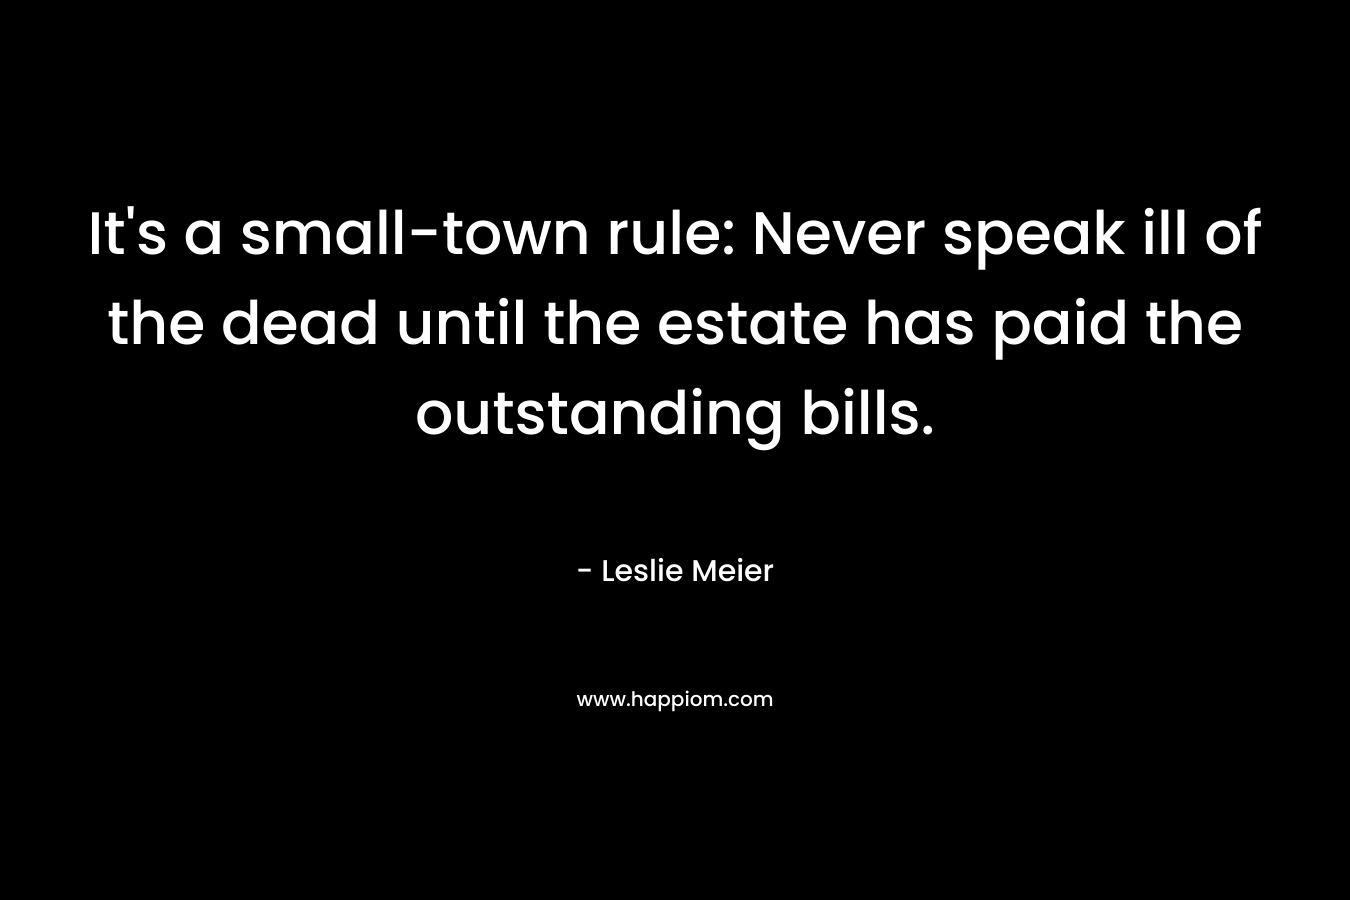 It’s a small-town rule: Never speak ill of the dead until the estate has paid the outstanding bills. – Leslie Meier